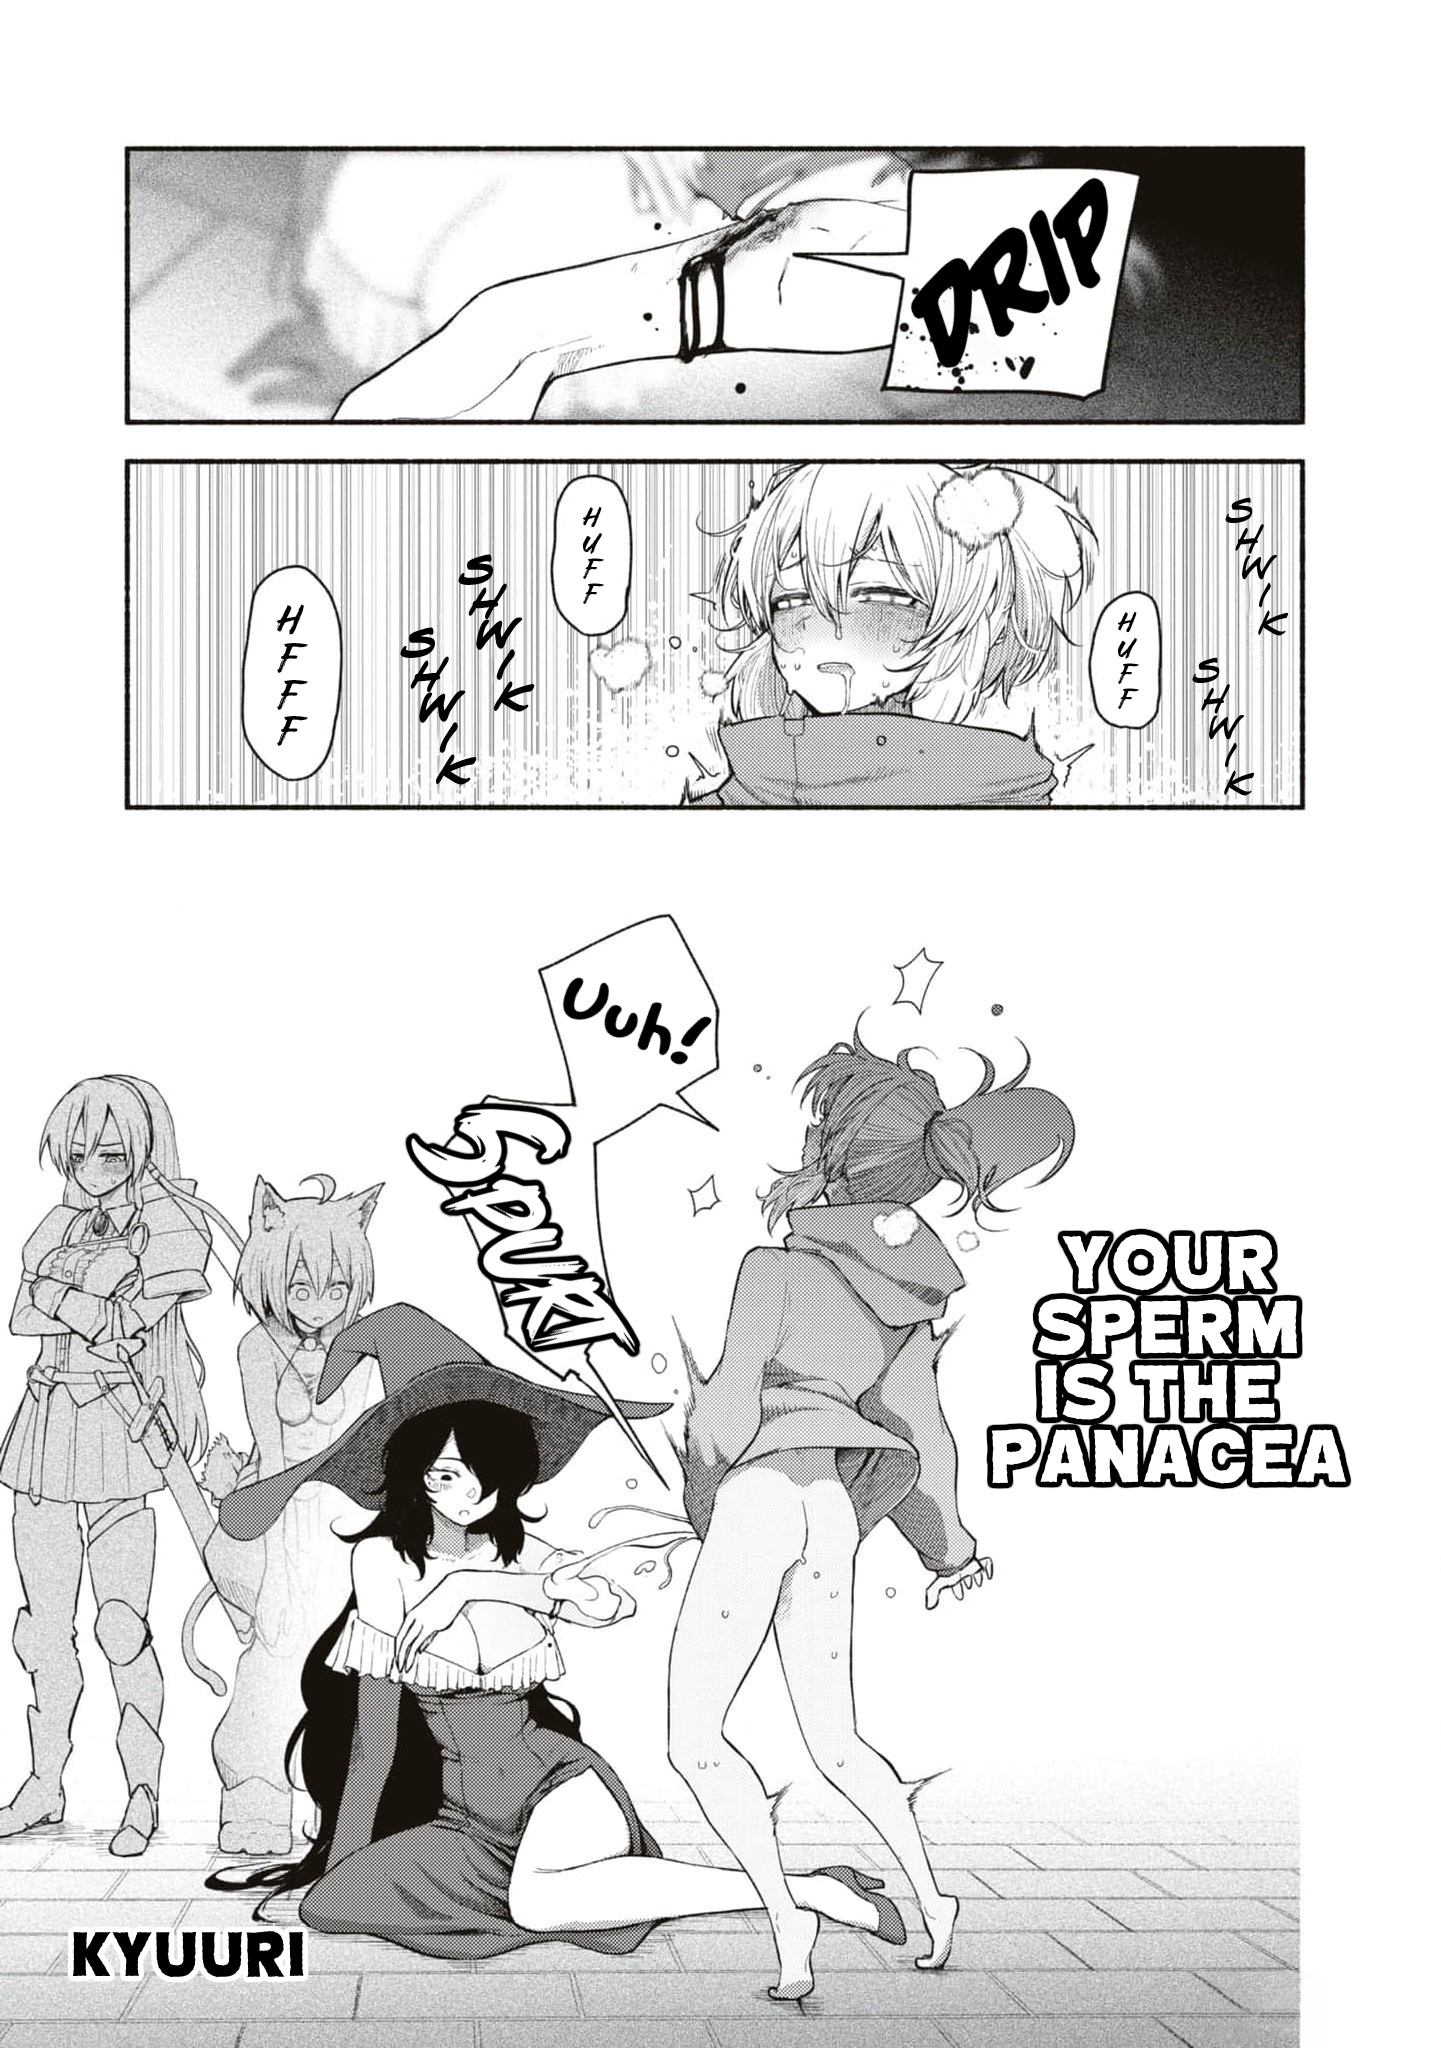 Dungeon De Sex Musou Anthology Comic Vol.1 Chapter 1: Your Sperm Is The Panacea (By Kyuuri) - Picture 1